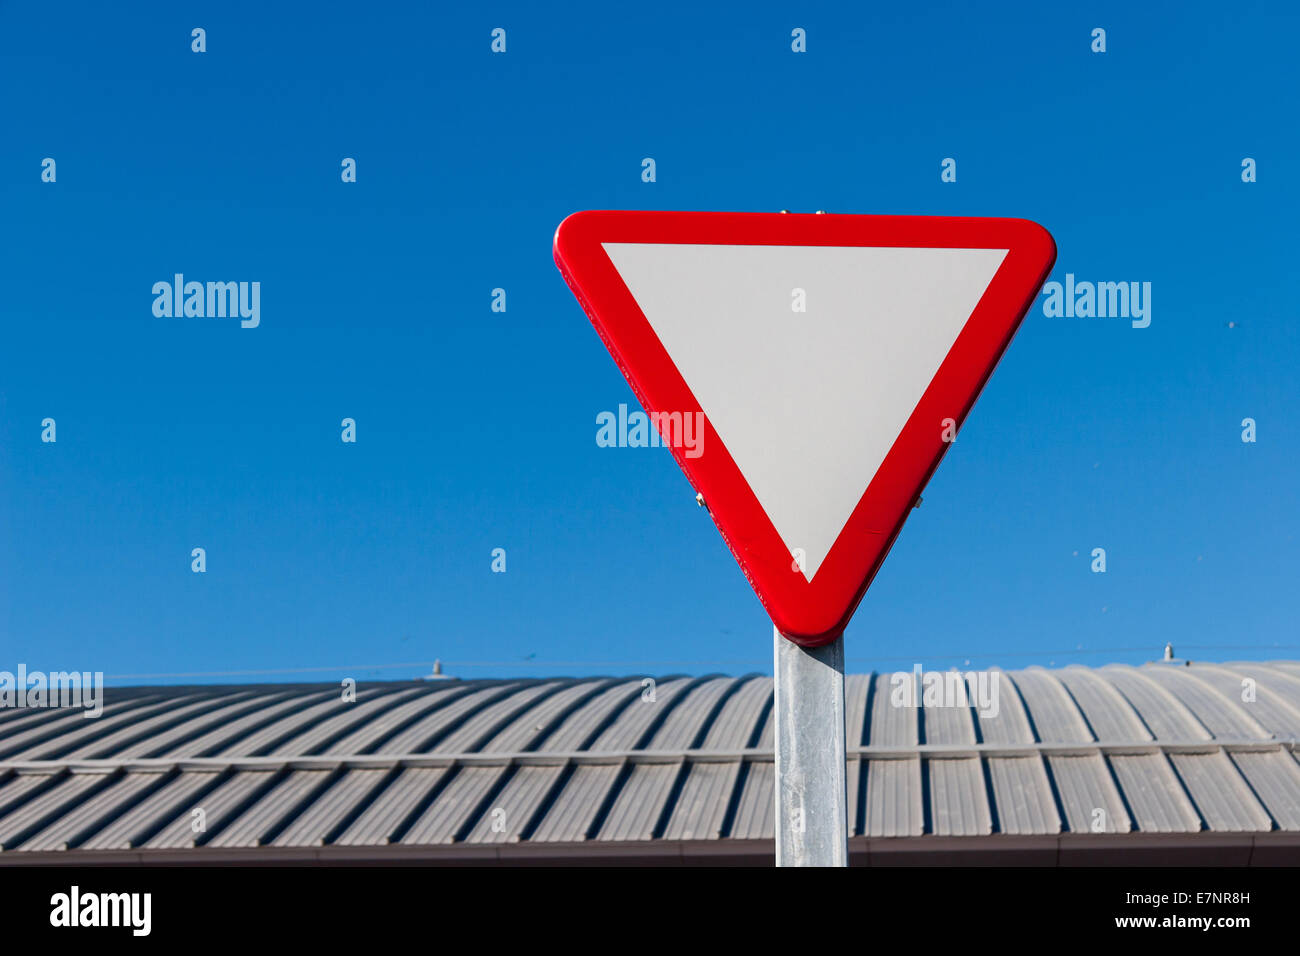 Yield sign Stock Photo